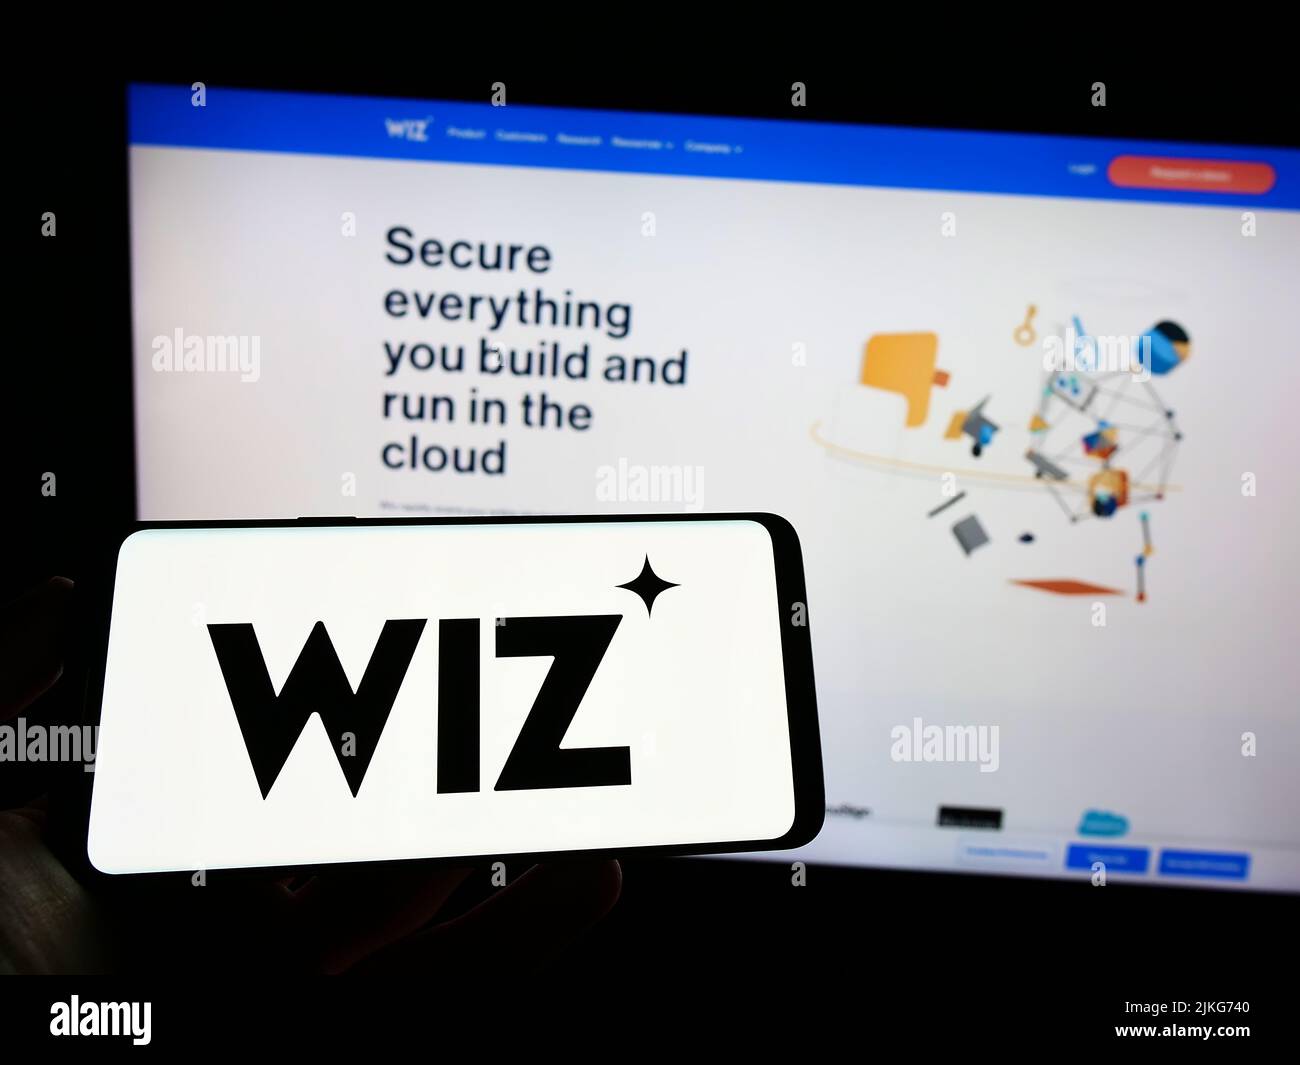 Person holding cellphone with logo of US cloud security company Wiz Inc. on screen in front of business webpage. Focus on phone display. Stock Photo